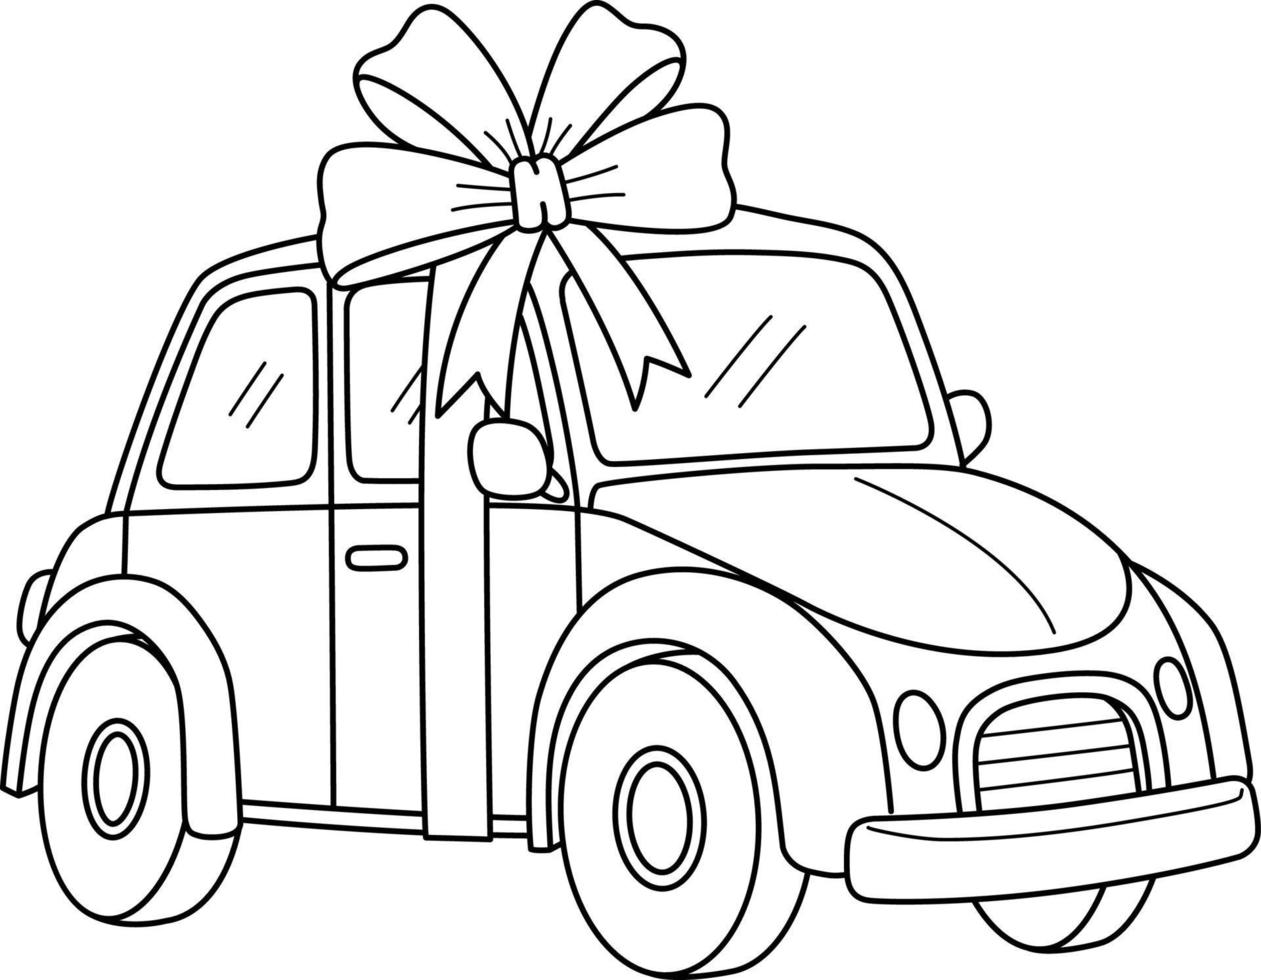 Car with Ribbon Isolated Coloring Page for Kids vector